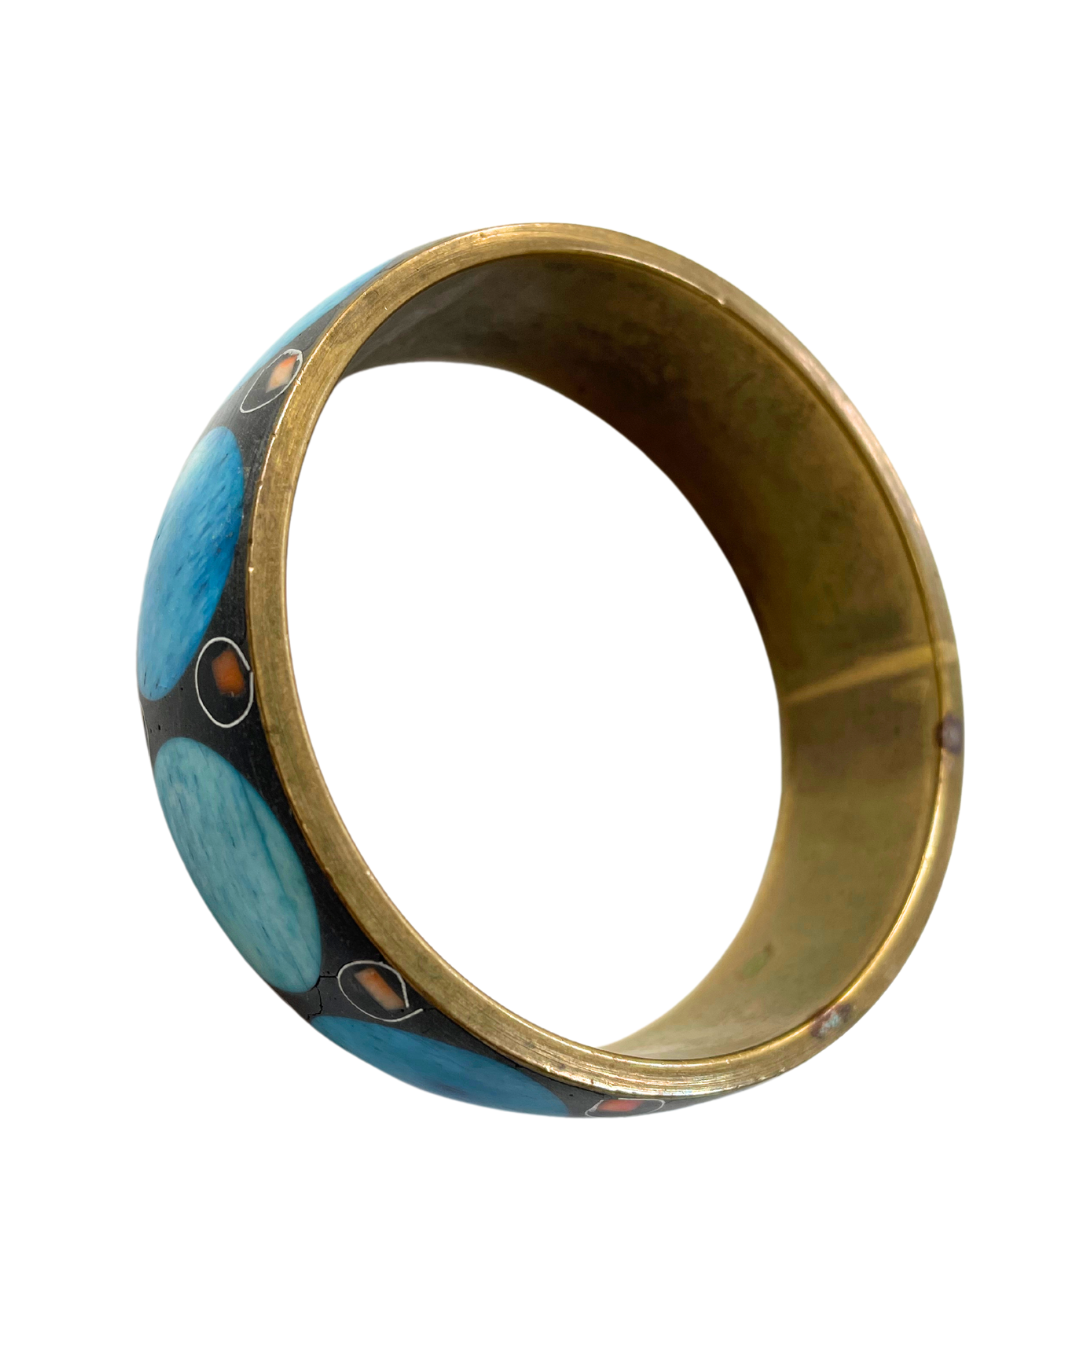 Gold Tone Bangle with Blue Elements